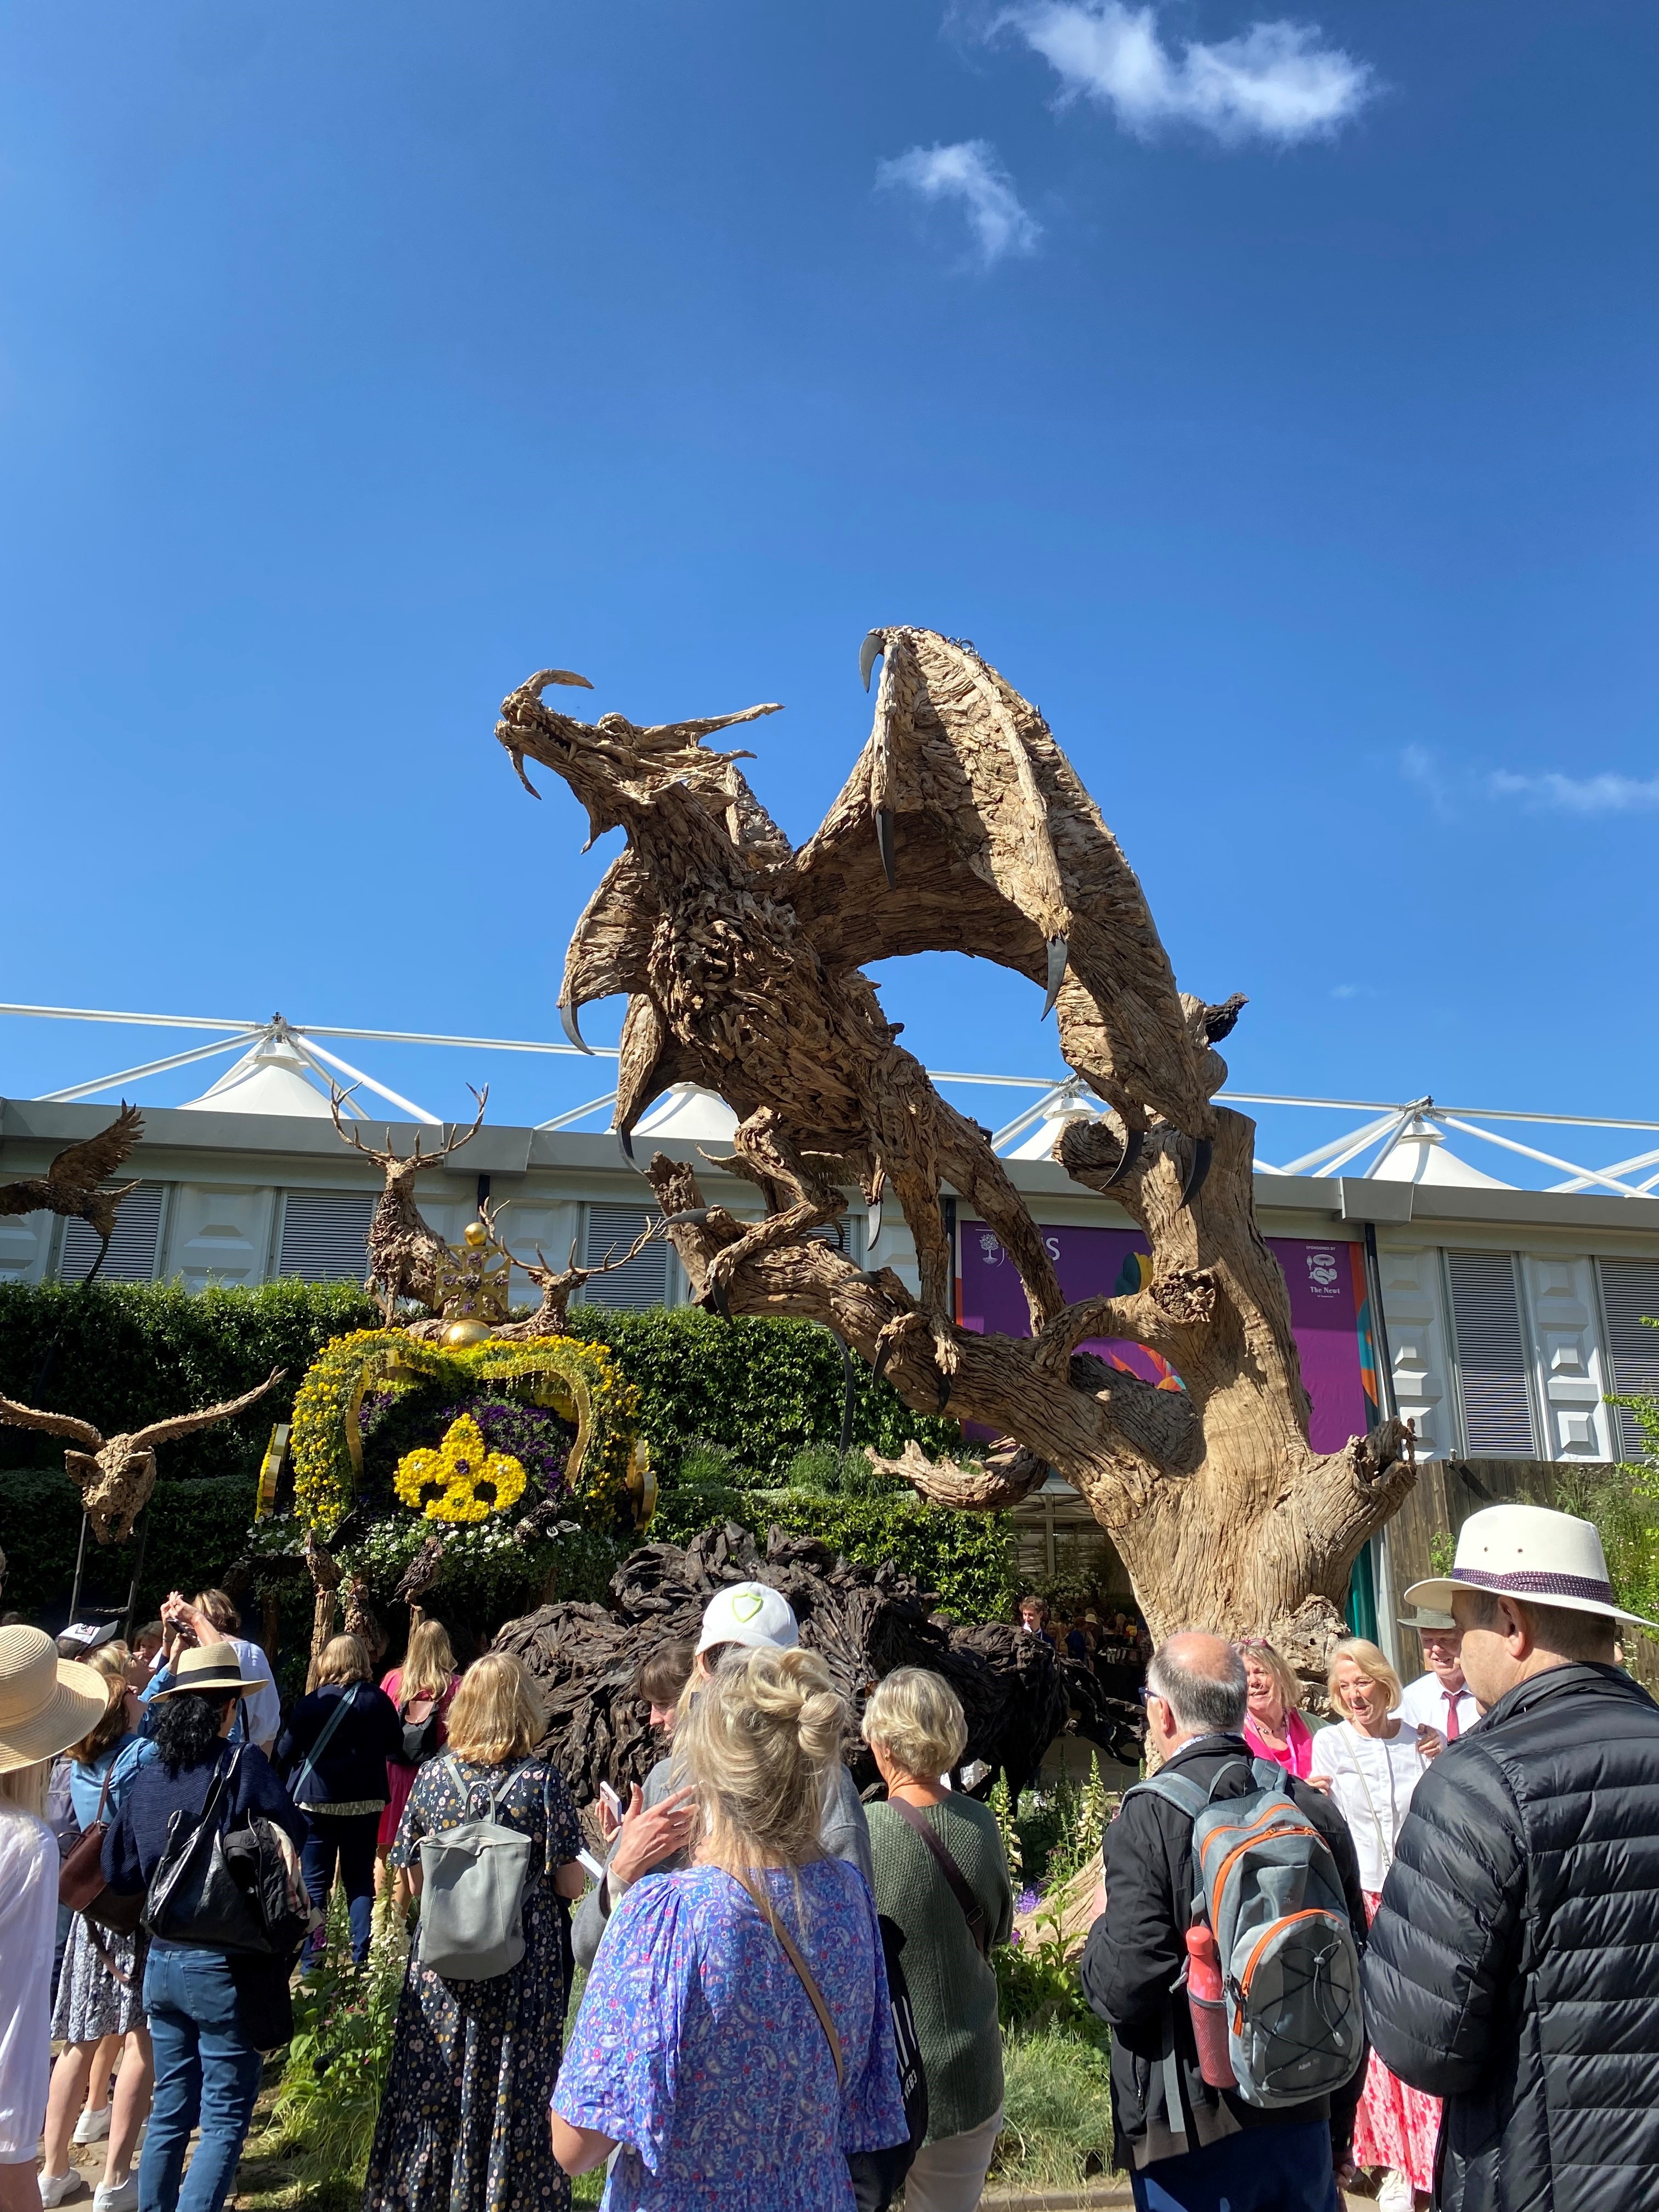 A first look at the Chelsea Flower Show: The Charity Gala Preview